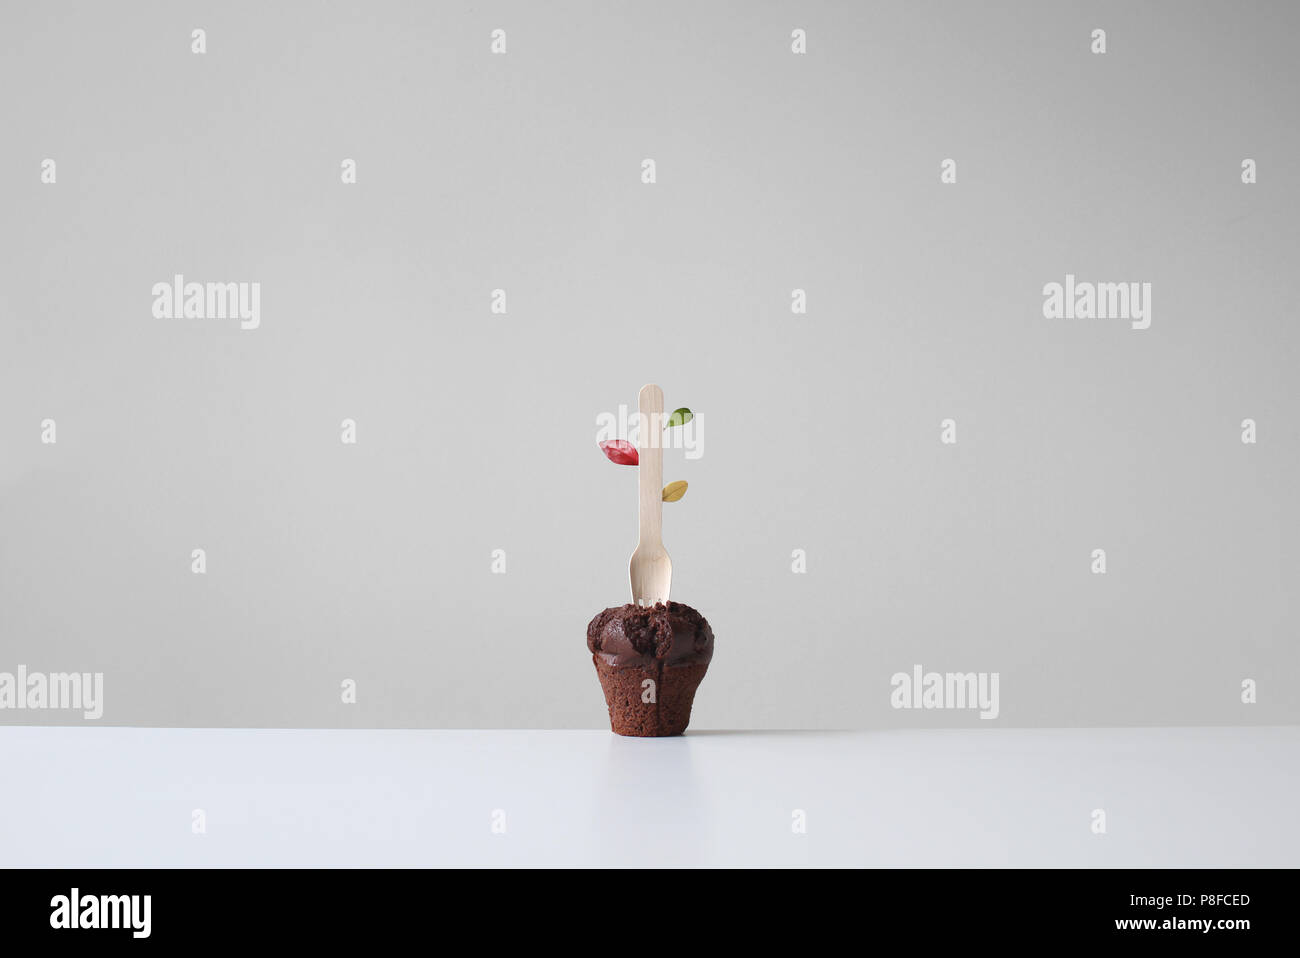 Conceptual tree growing in soil Stock Photo